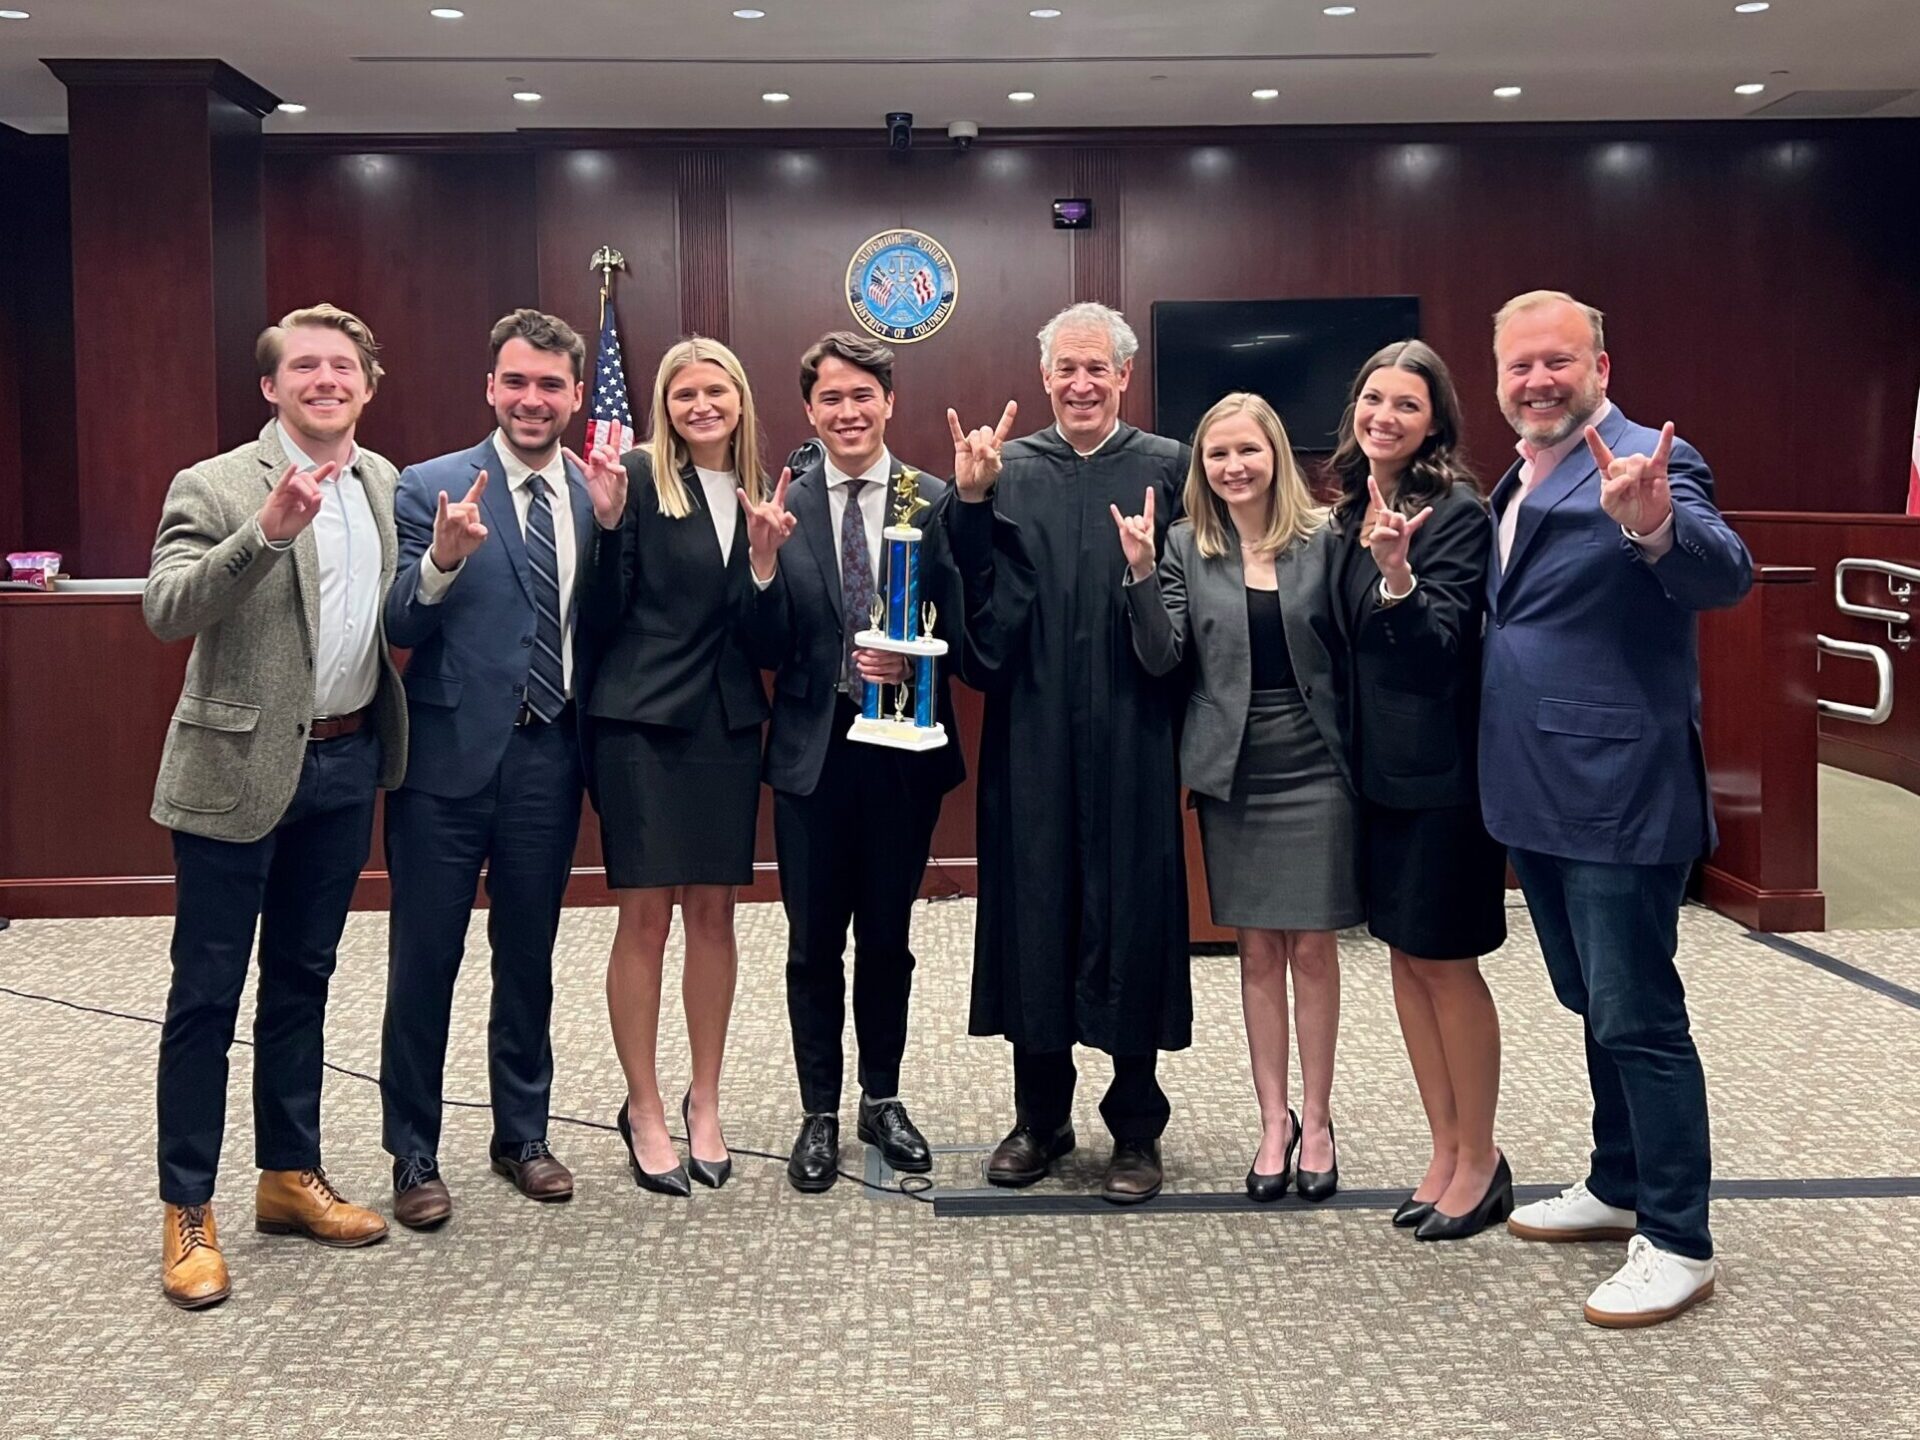 Mock trial team of students and coaches holding trophy, standing in courtroom 